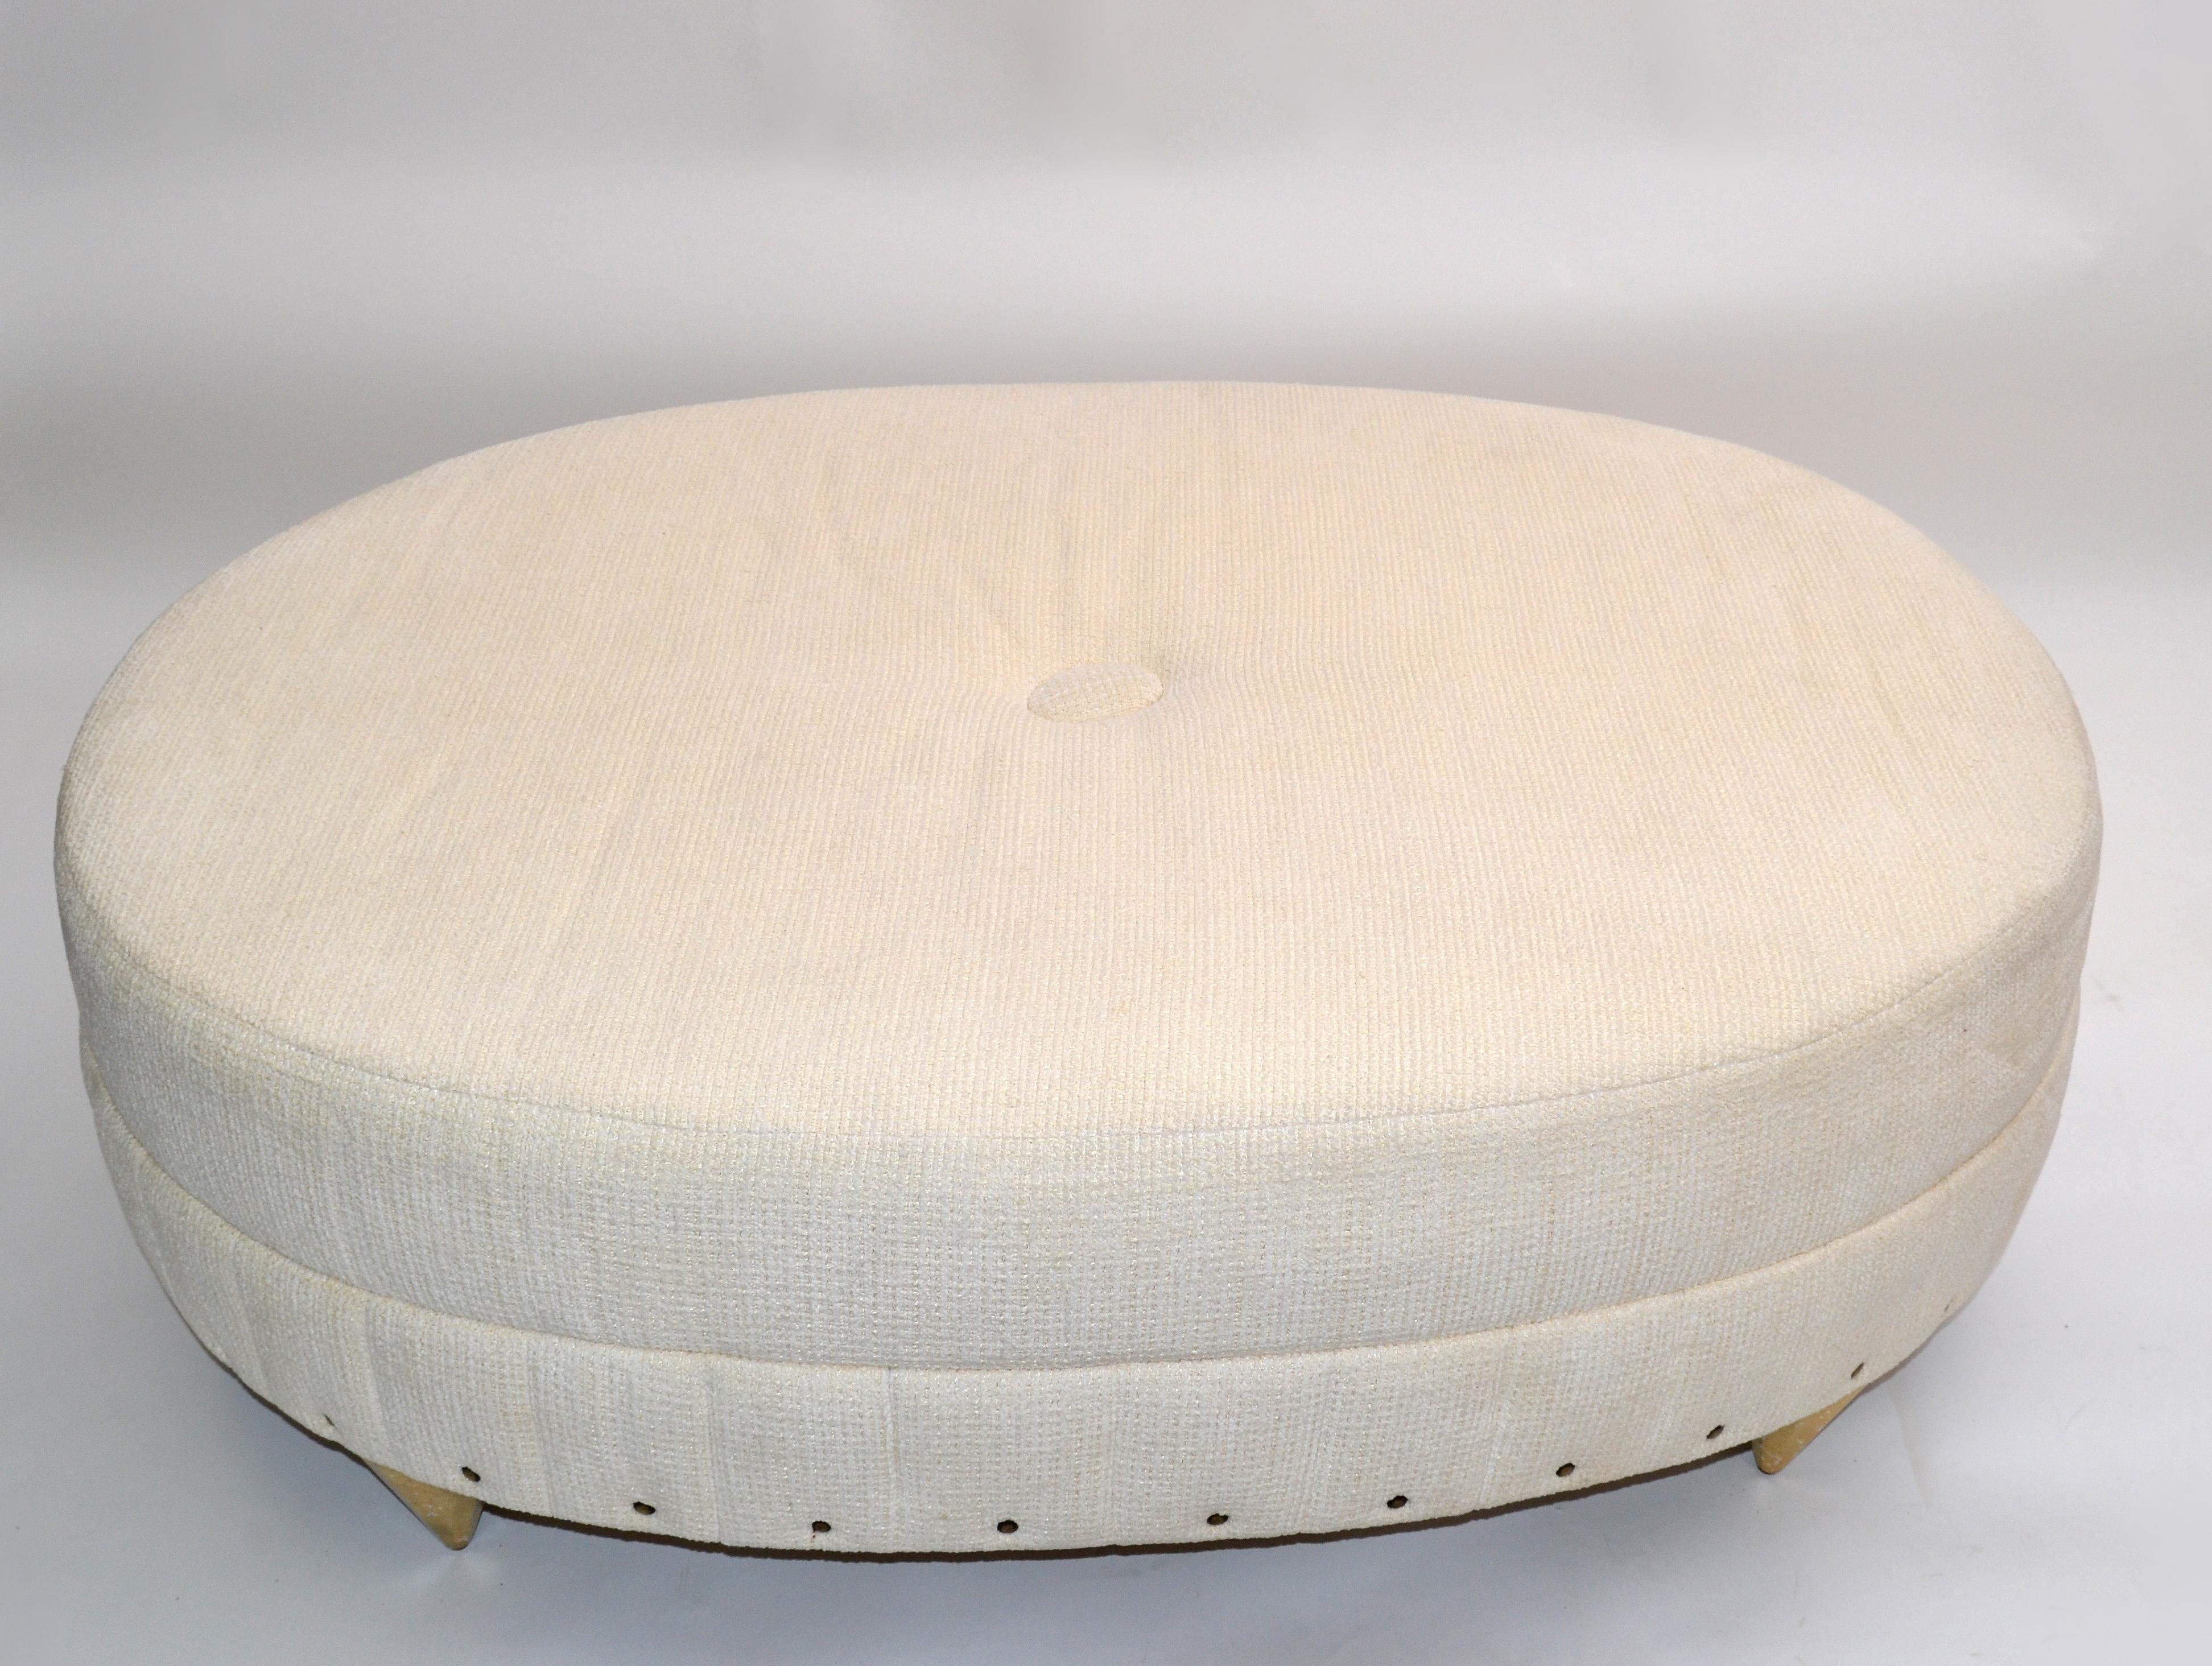 Modern daybed, round sofa, oversized ottoman designed by Larry Laslo for Directional in the 1990s.
Upholstery is a high quality beige and gold or taupe color bouclé fabric.
Elegant golden wooden legs in diamond shape.
Original label is